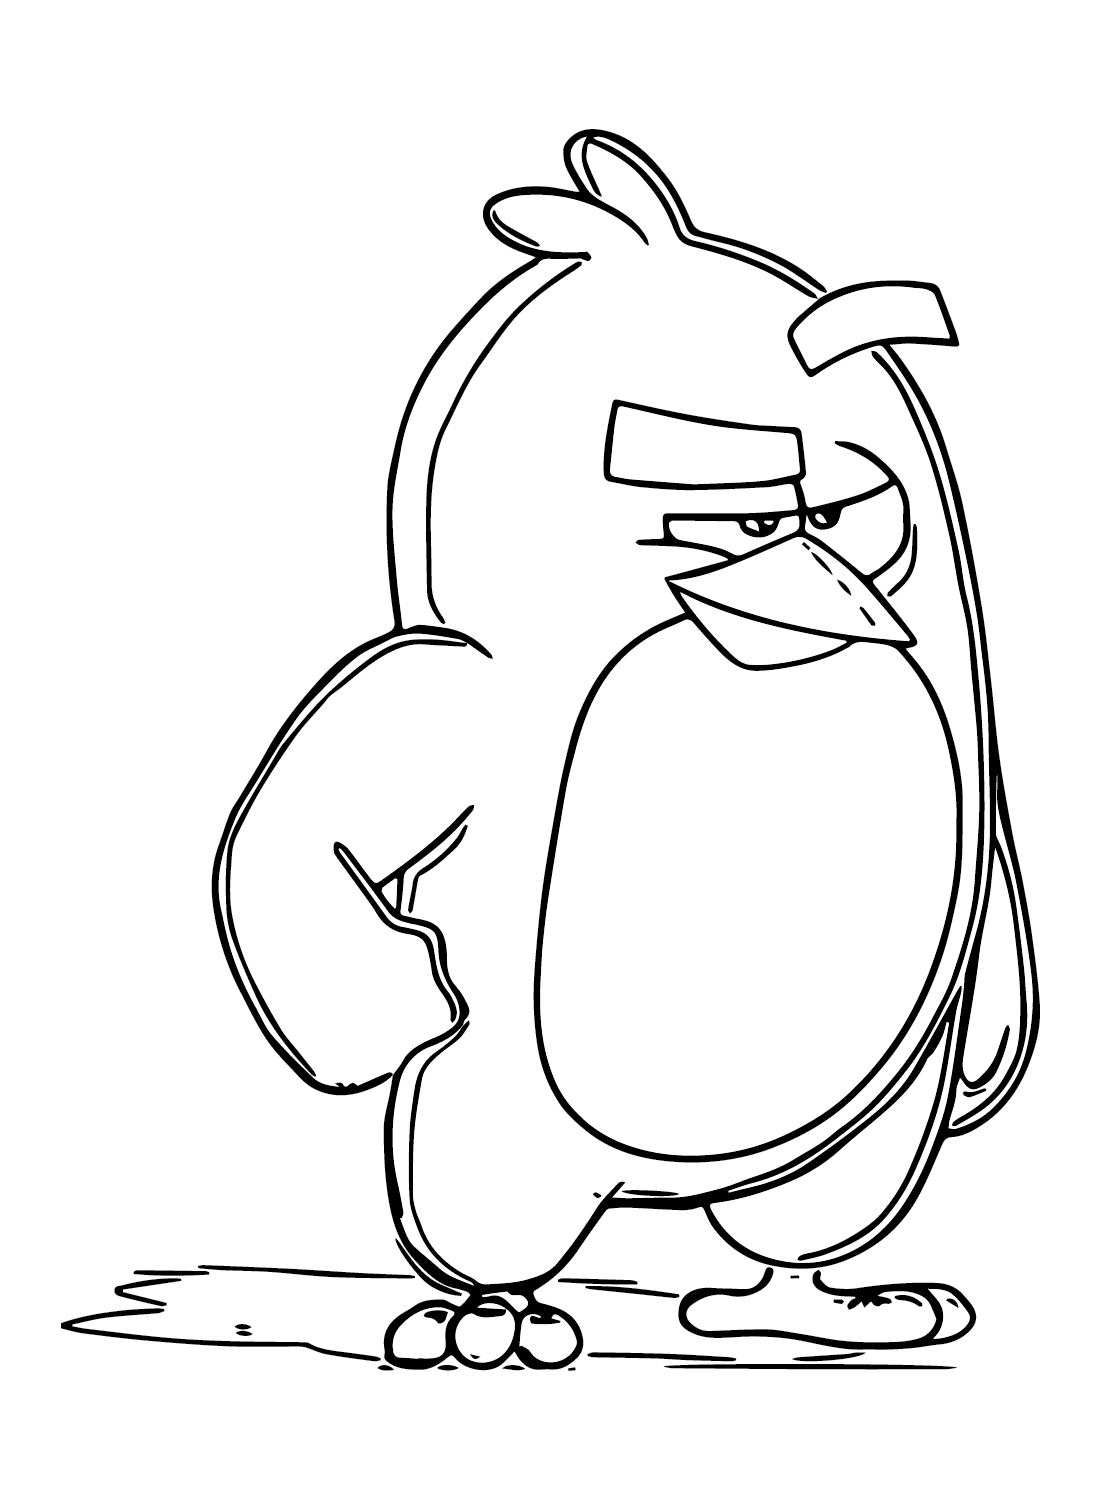 red bird coloring pages